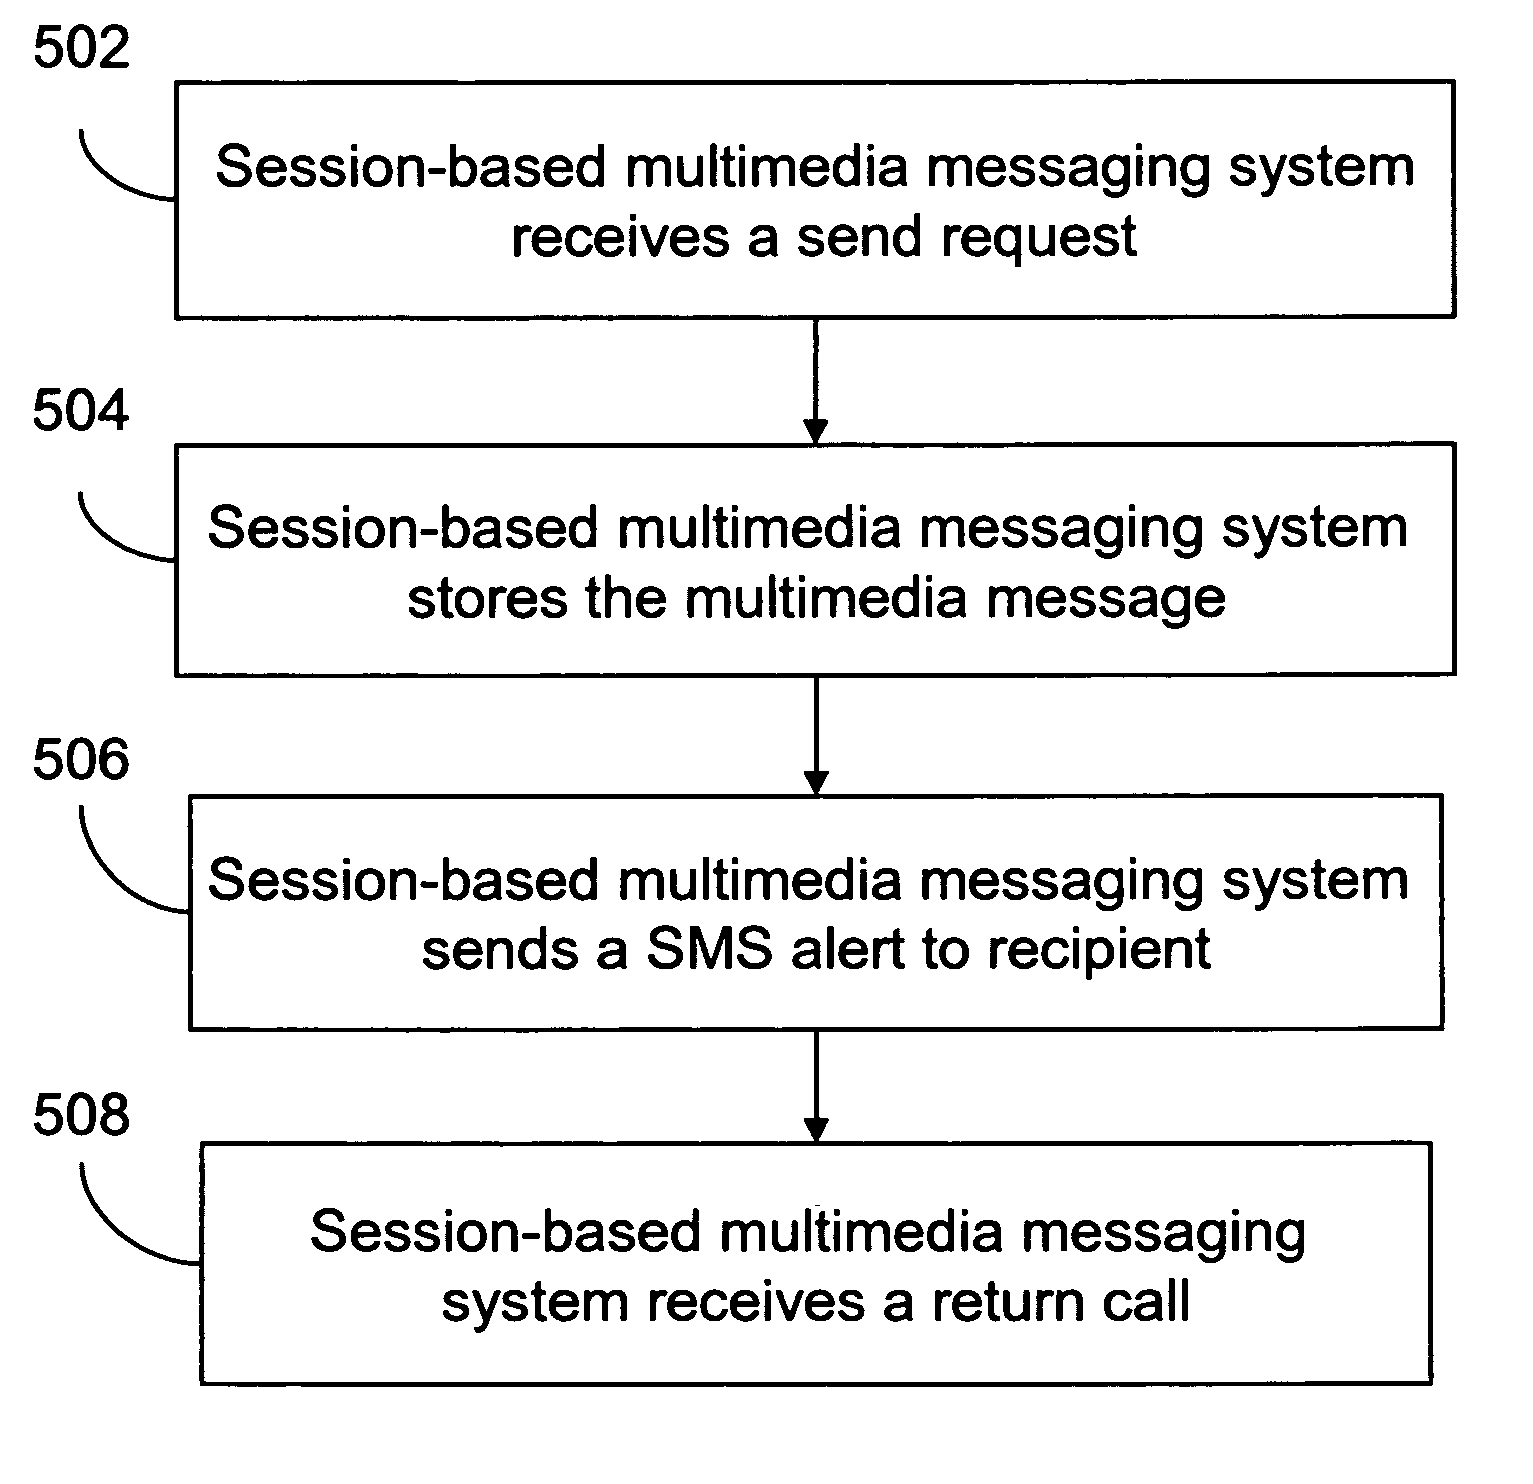 Session-based multimedia messaging service